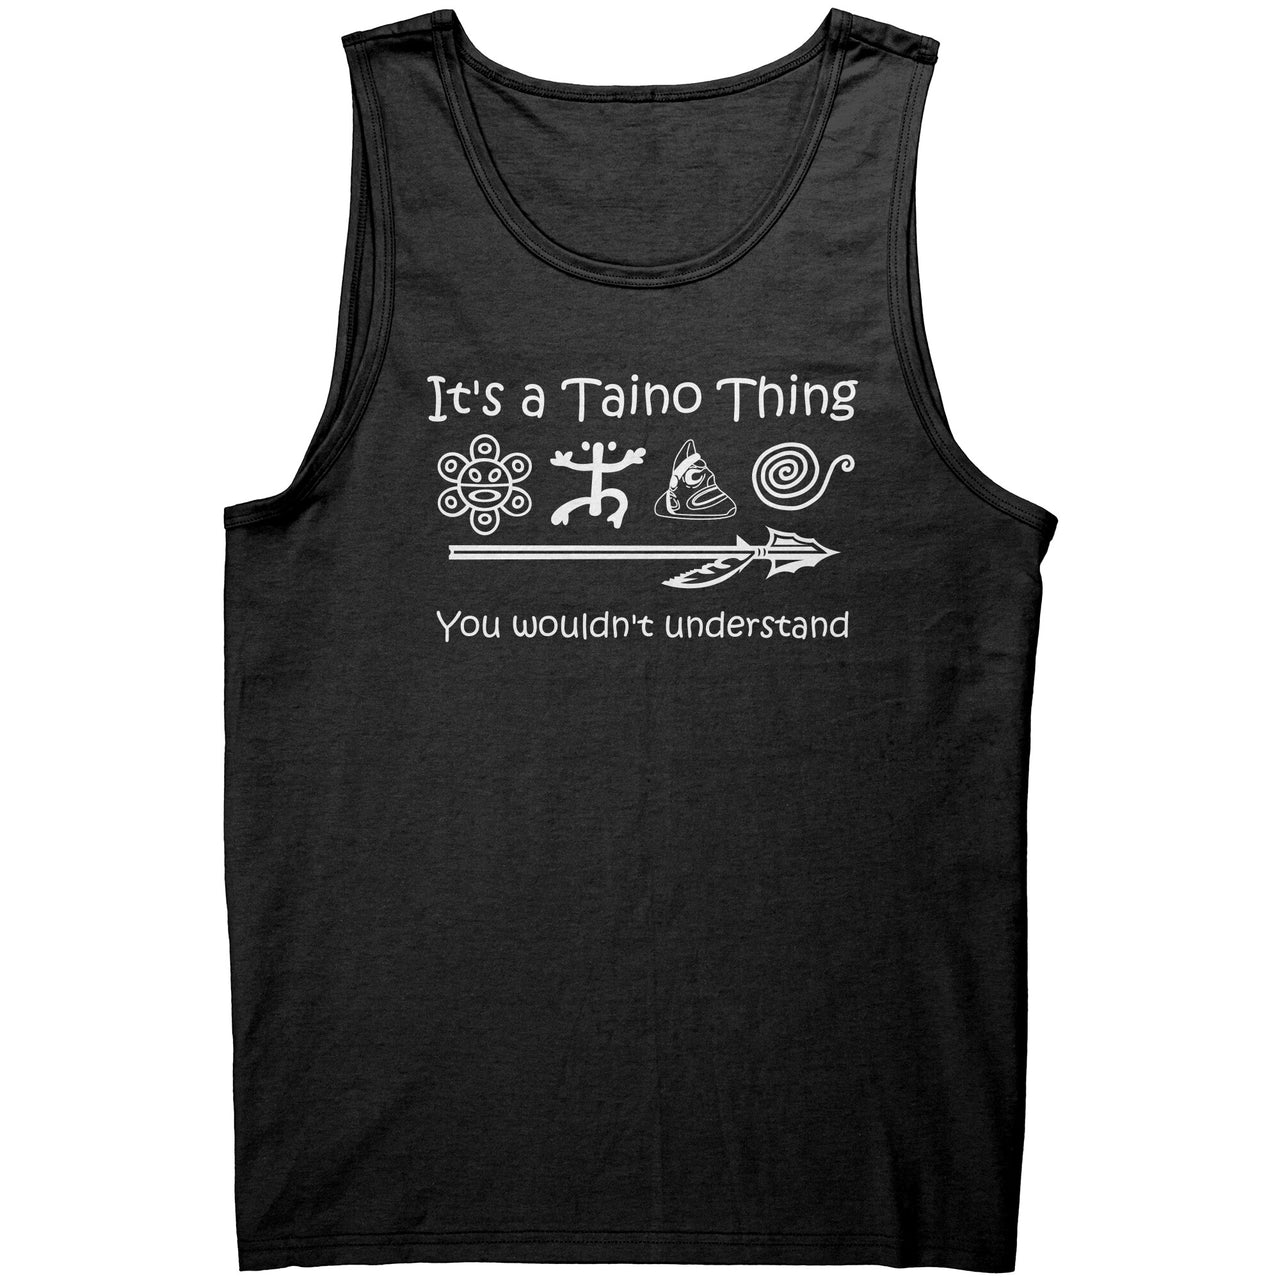 It's A Taino Thing, You Won't Understand Men's Tank Top (Small-4XL)